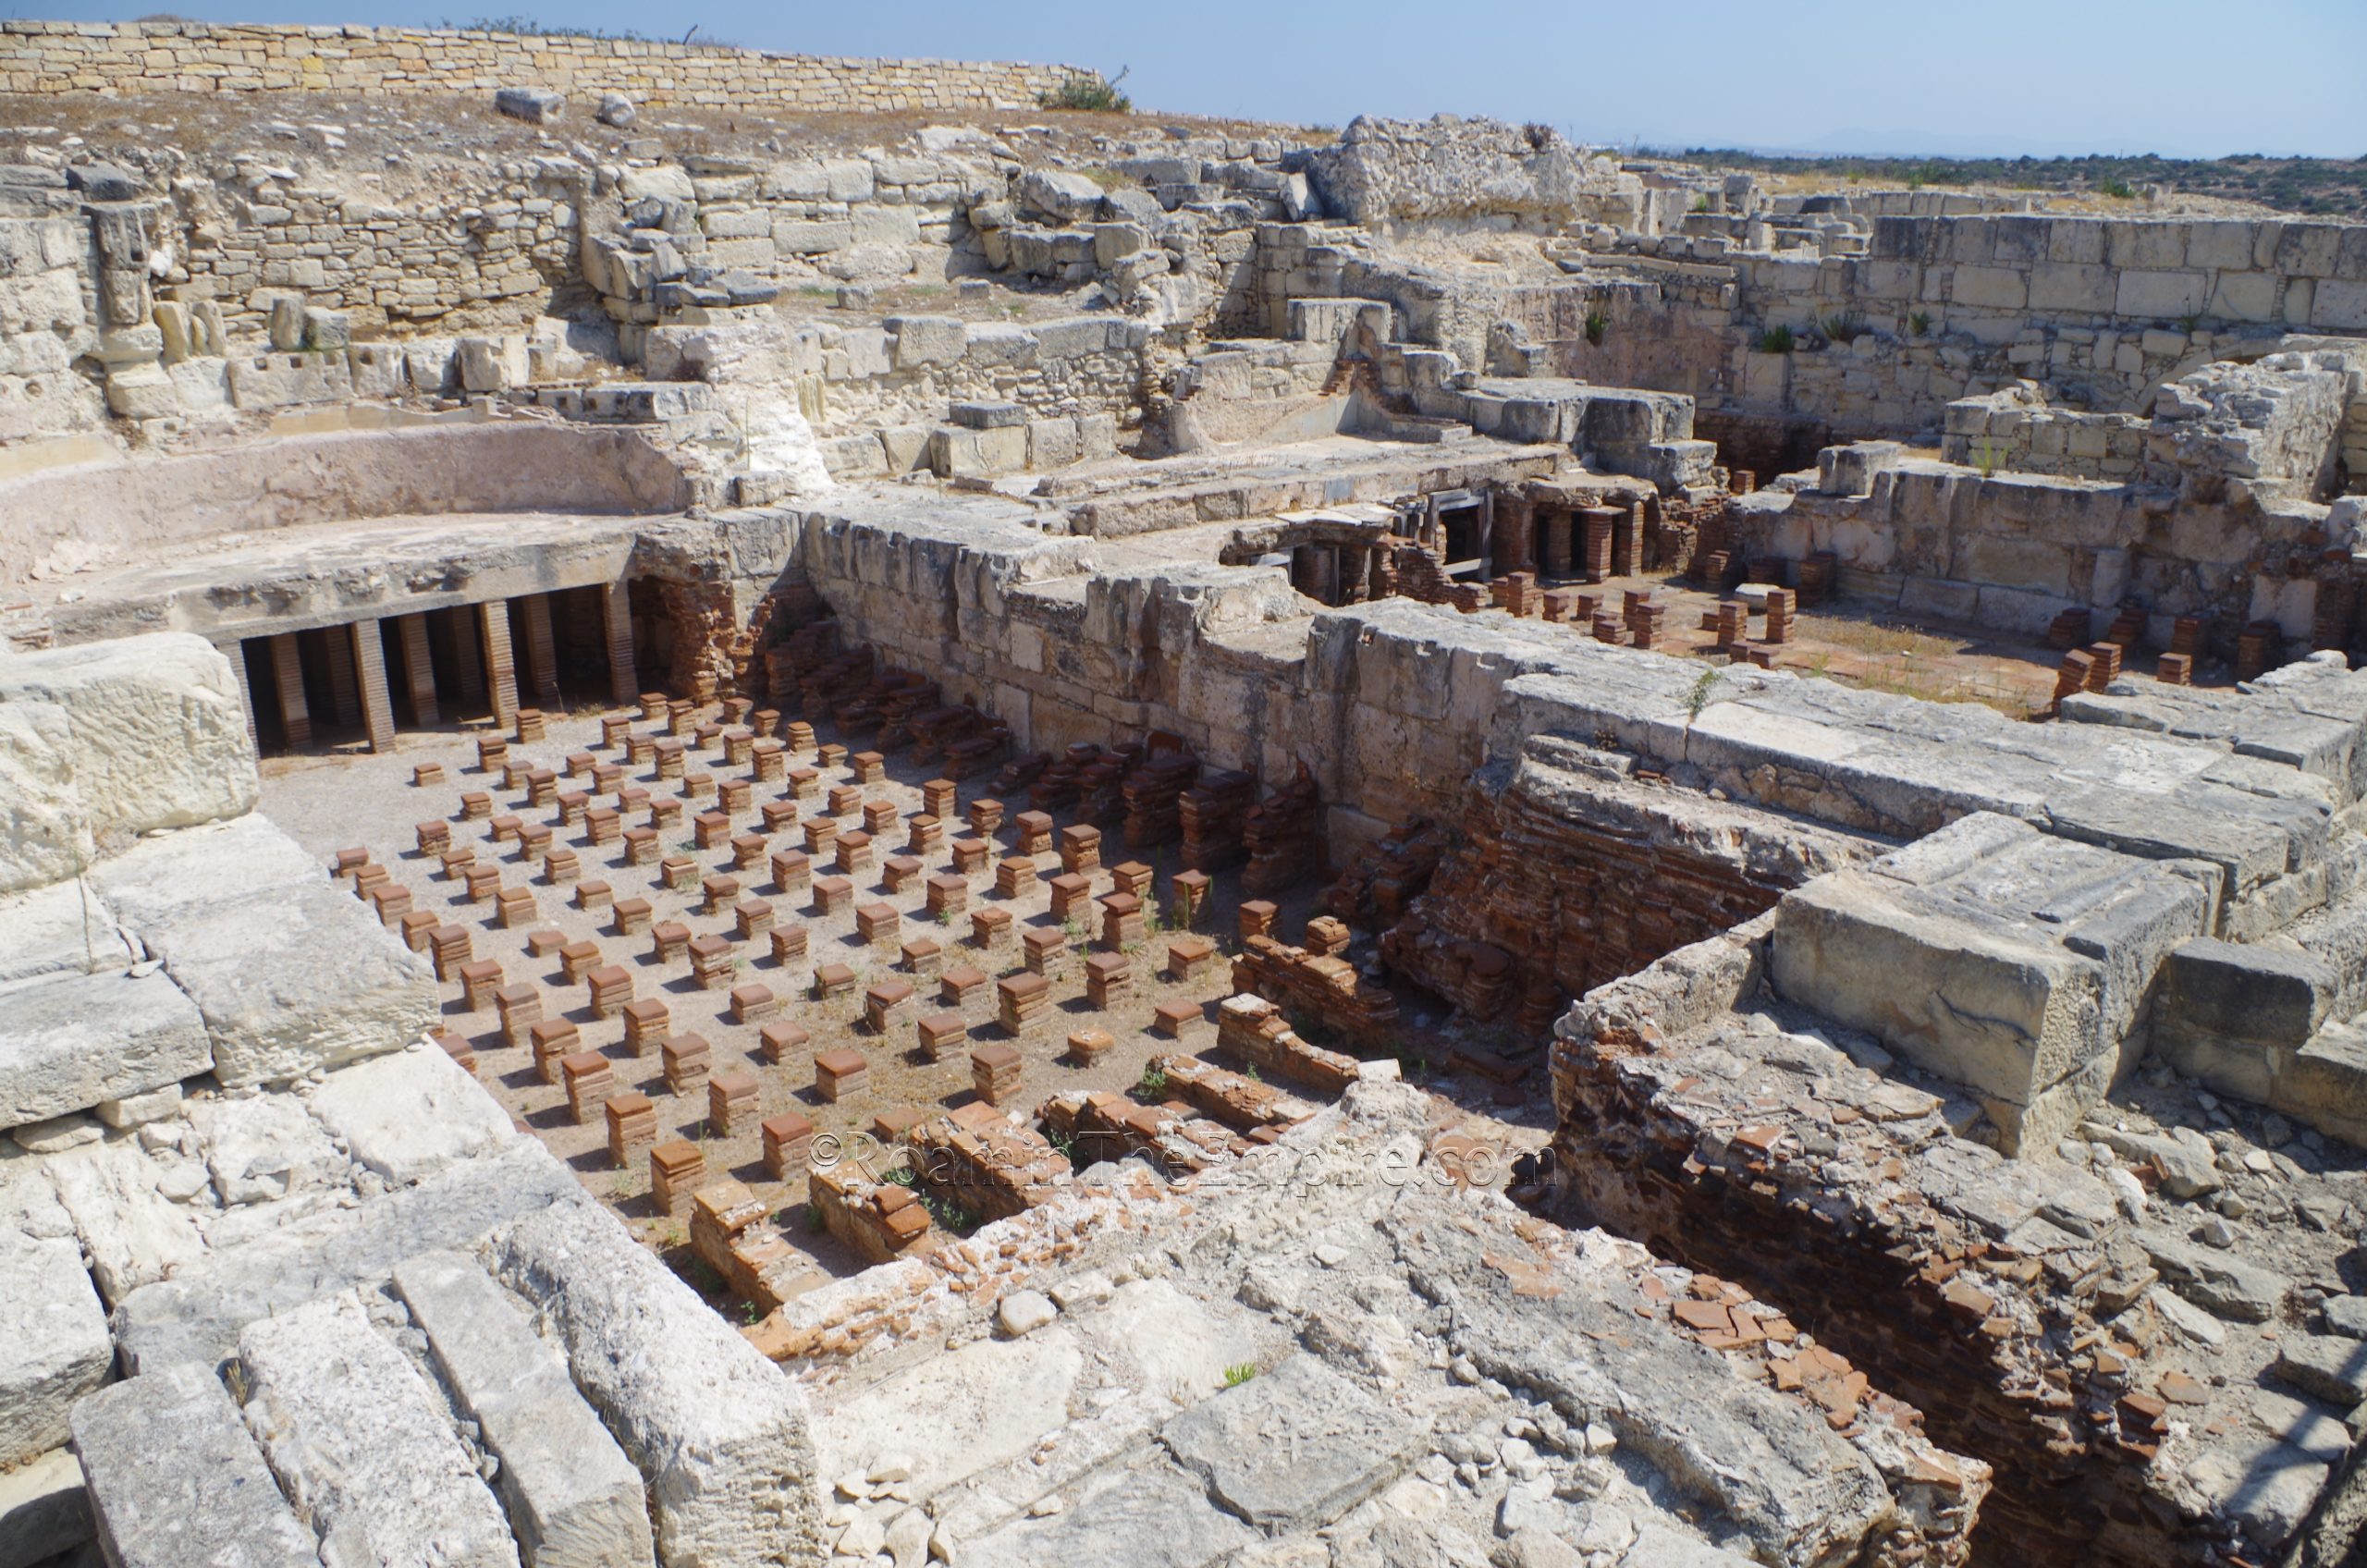 Warm rooms of the bathing complex. Curium.